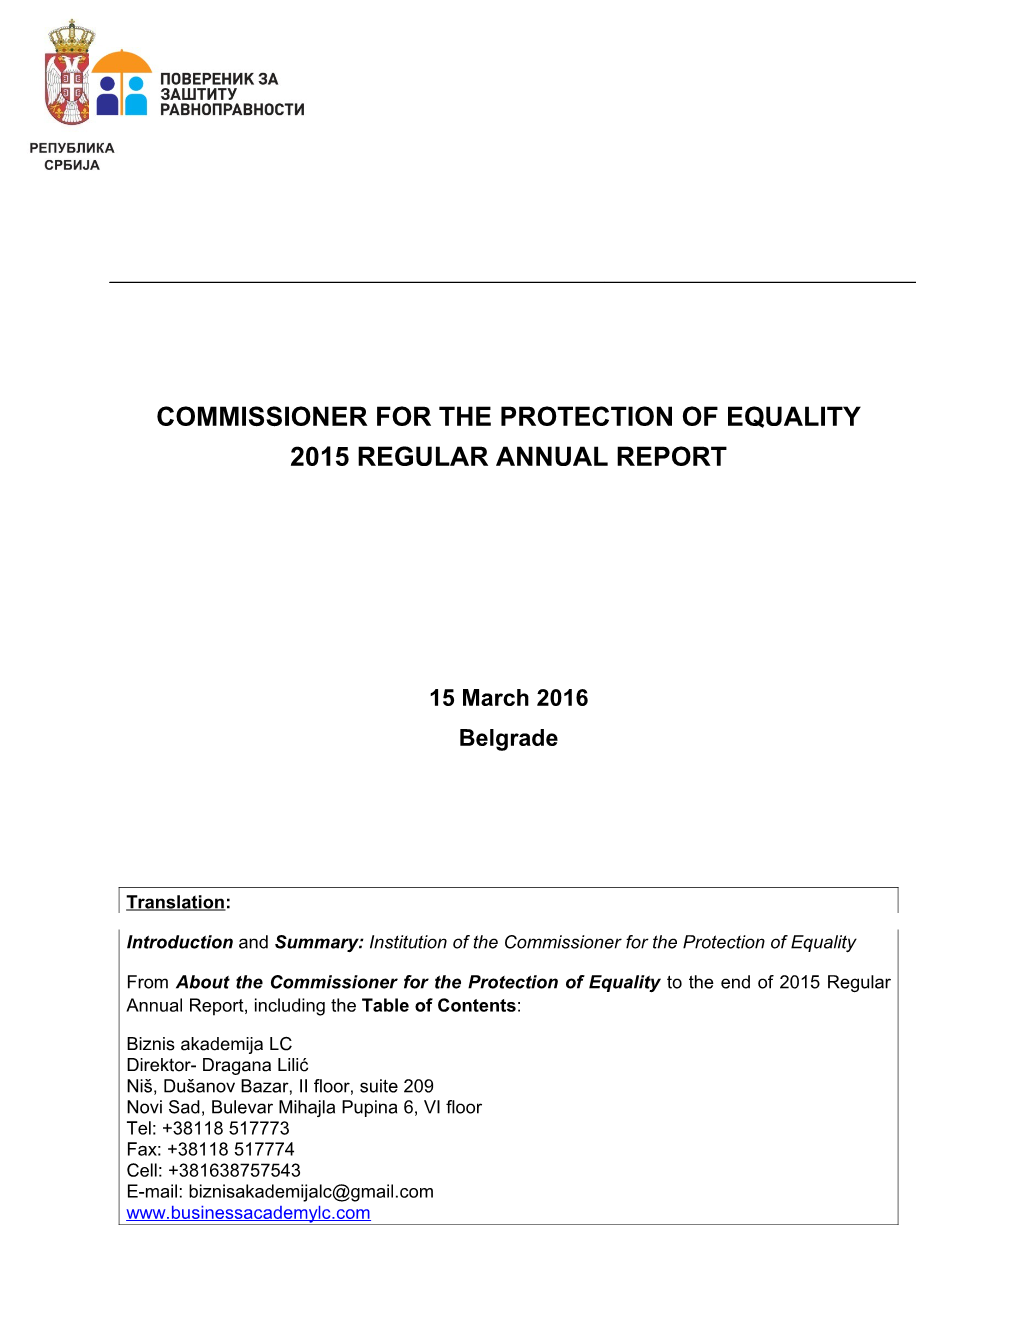 Commissioner for the Protection of Equality